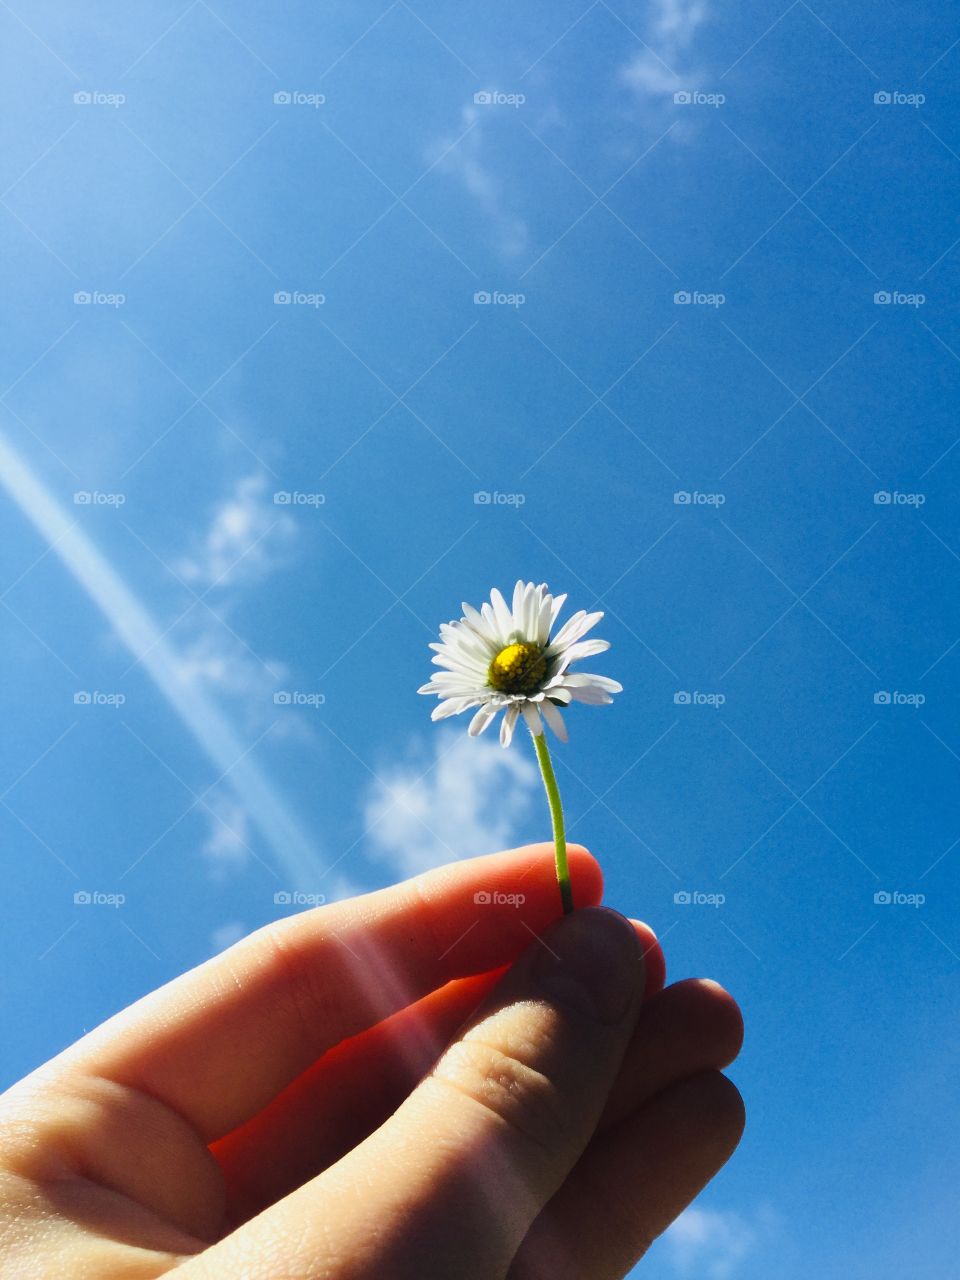 This is a photo of a daisy and the sky is the background. There is a beam of sun comping from the left.